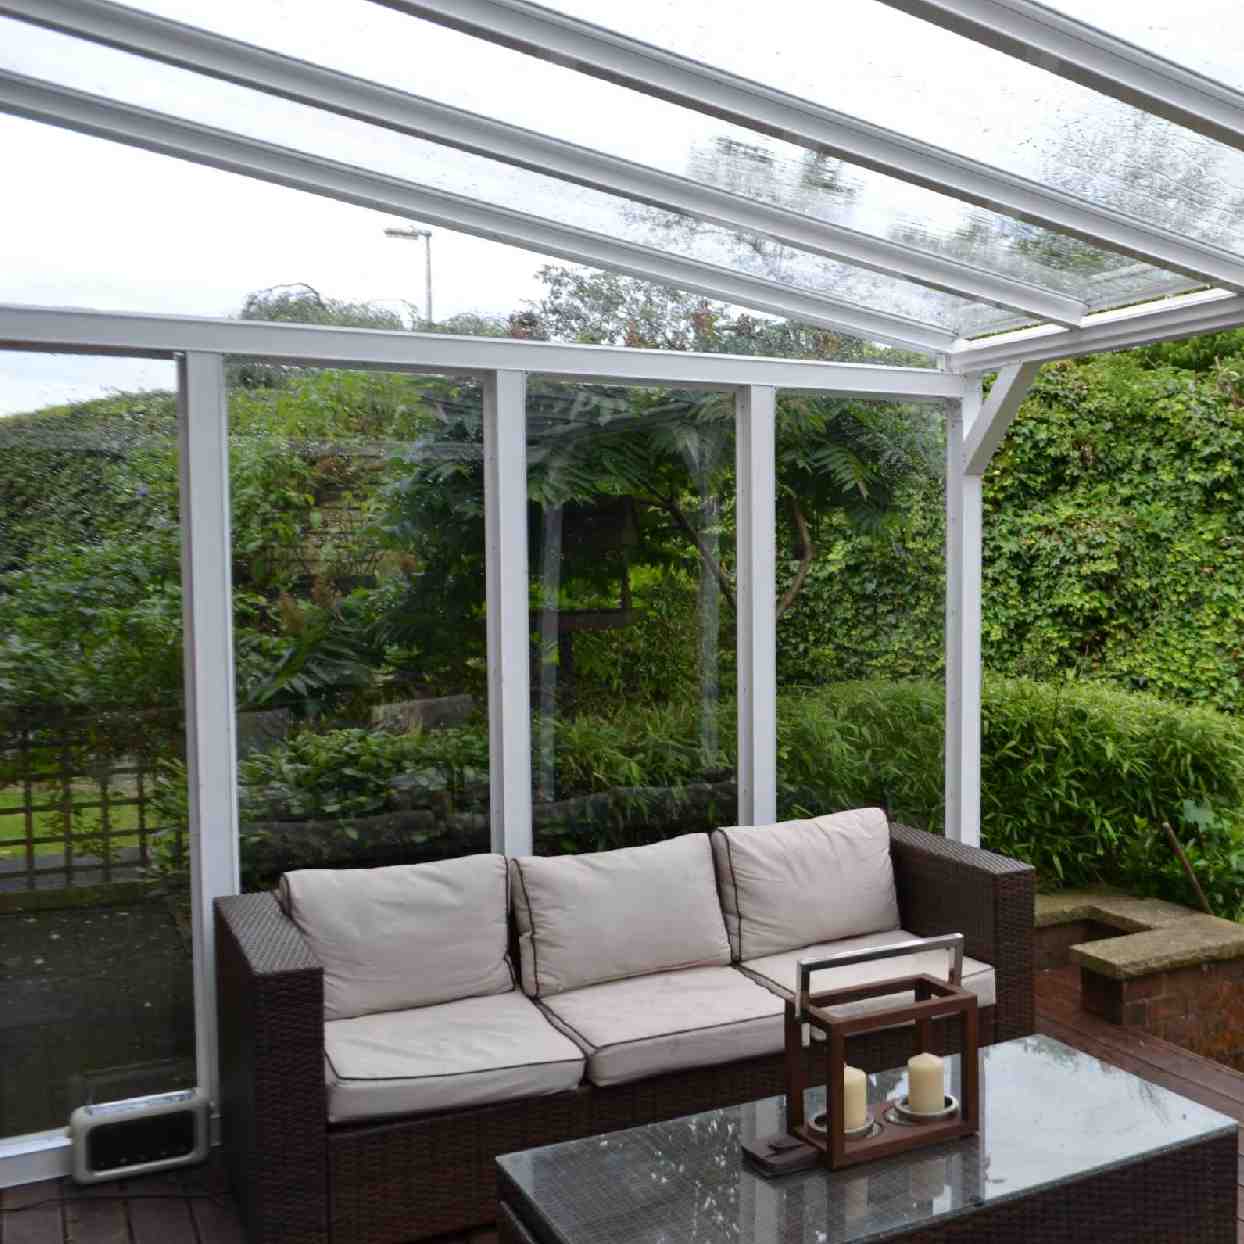 Buy Omega Verandah White with 16mm Polycarbonate Glazing - 3.5m (W) x 4.0m (P), (3) Supporting Posts online today